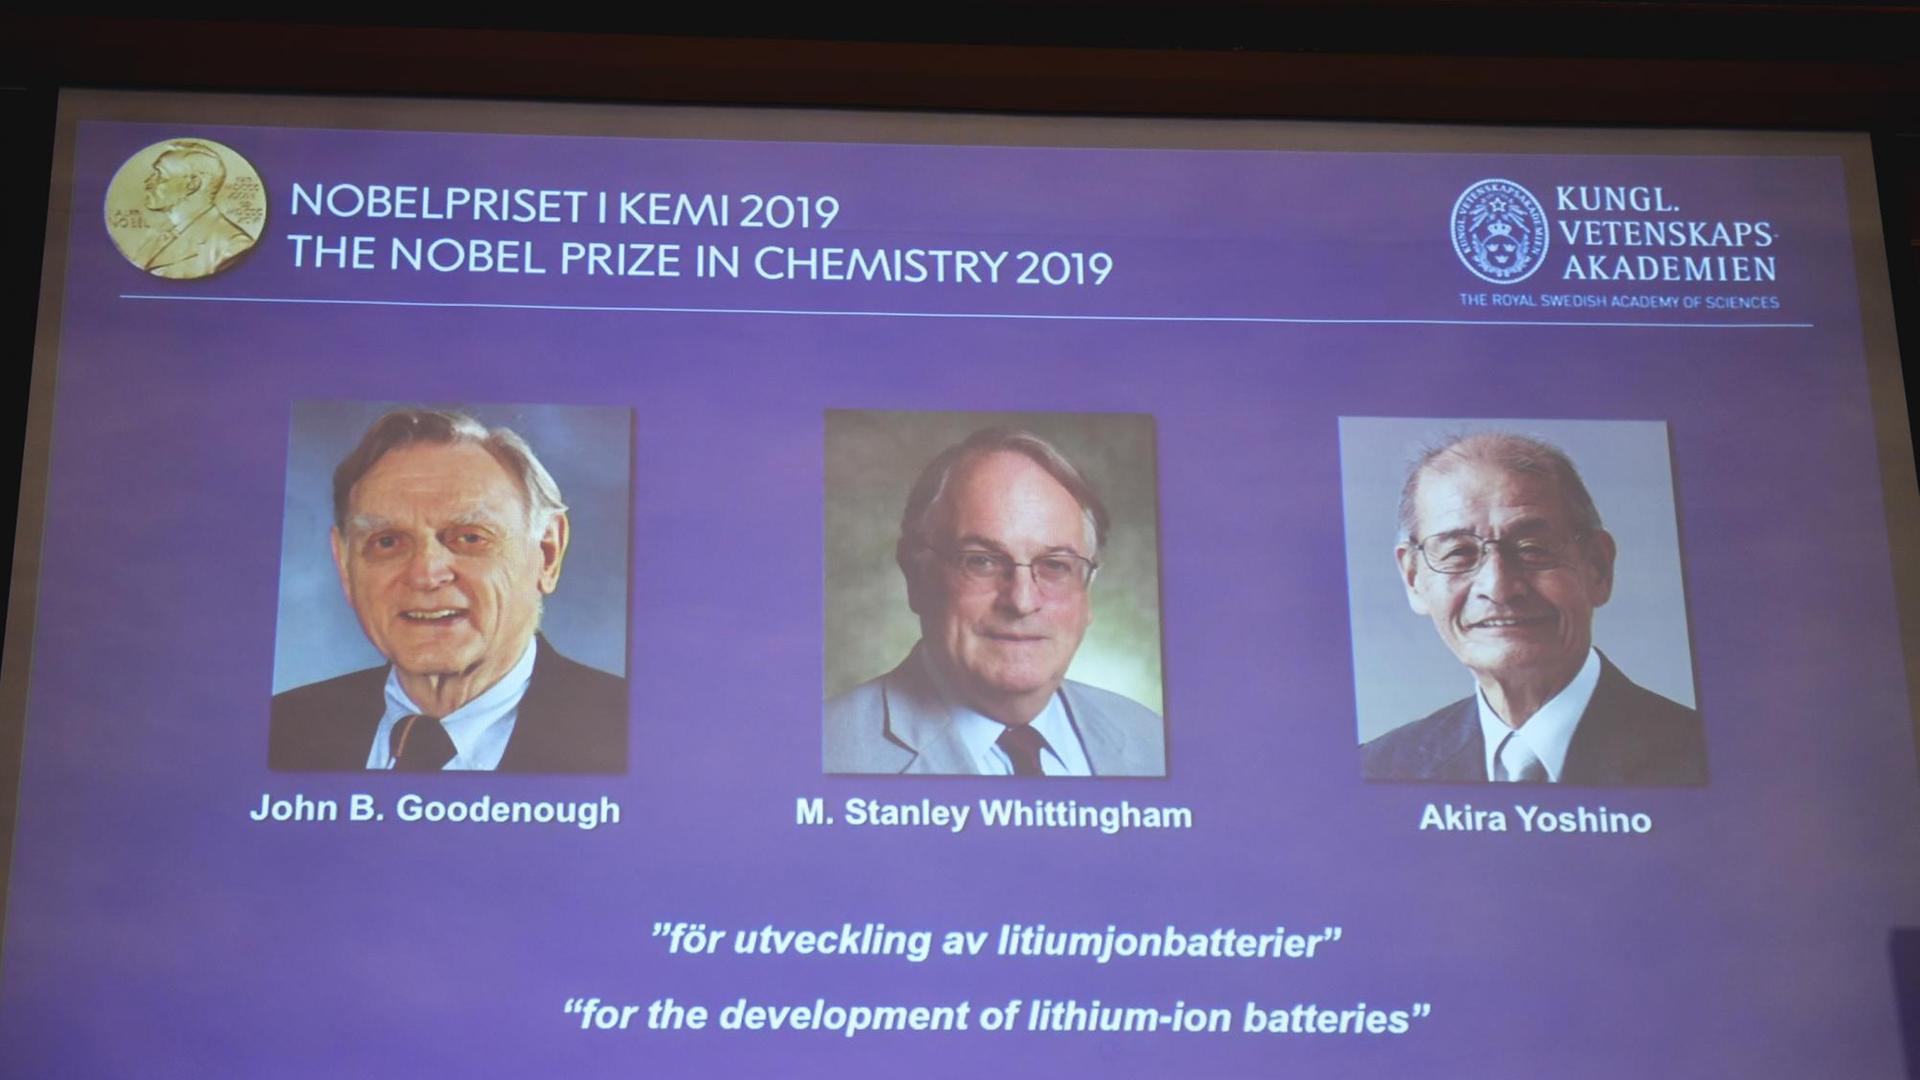 A screen displays the portraits of the laureates of the 2019 Nobel Prize in Chemistry (L-R) John Goodenough of US, Britain's Stanley Whittingham and Japan's Akira Yoshino during a press conference at the Royal Swedish Academy of Sciences in Stockholm, Sweden, on October 9, 2019. - John Goodenough of US, Britain's Stanley Whittingham and Japan's Akira Yoshino won the 2019 Nobel Chemistry Prize for the development of lithium-ion batteries, the Royal Swedish Academy of Sciences said. "This lightweight, rechargeable and powerful battery is now used in everything from mobile phones to laptops and electric vehicles...(and) can also store significant amounts of energy from solar and wind power, making possible a fossil fuel-free society," the jury said. (Photo by Naina Helen JAMA / TT News Agency / AFP) / Sweden OUT